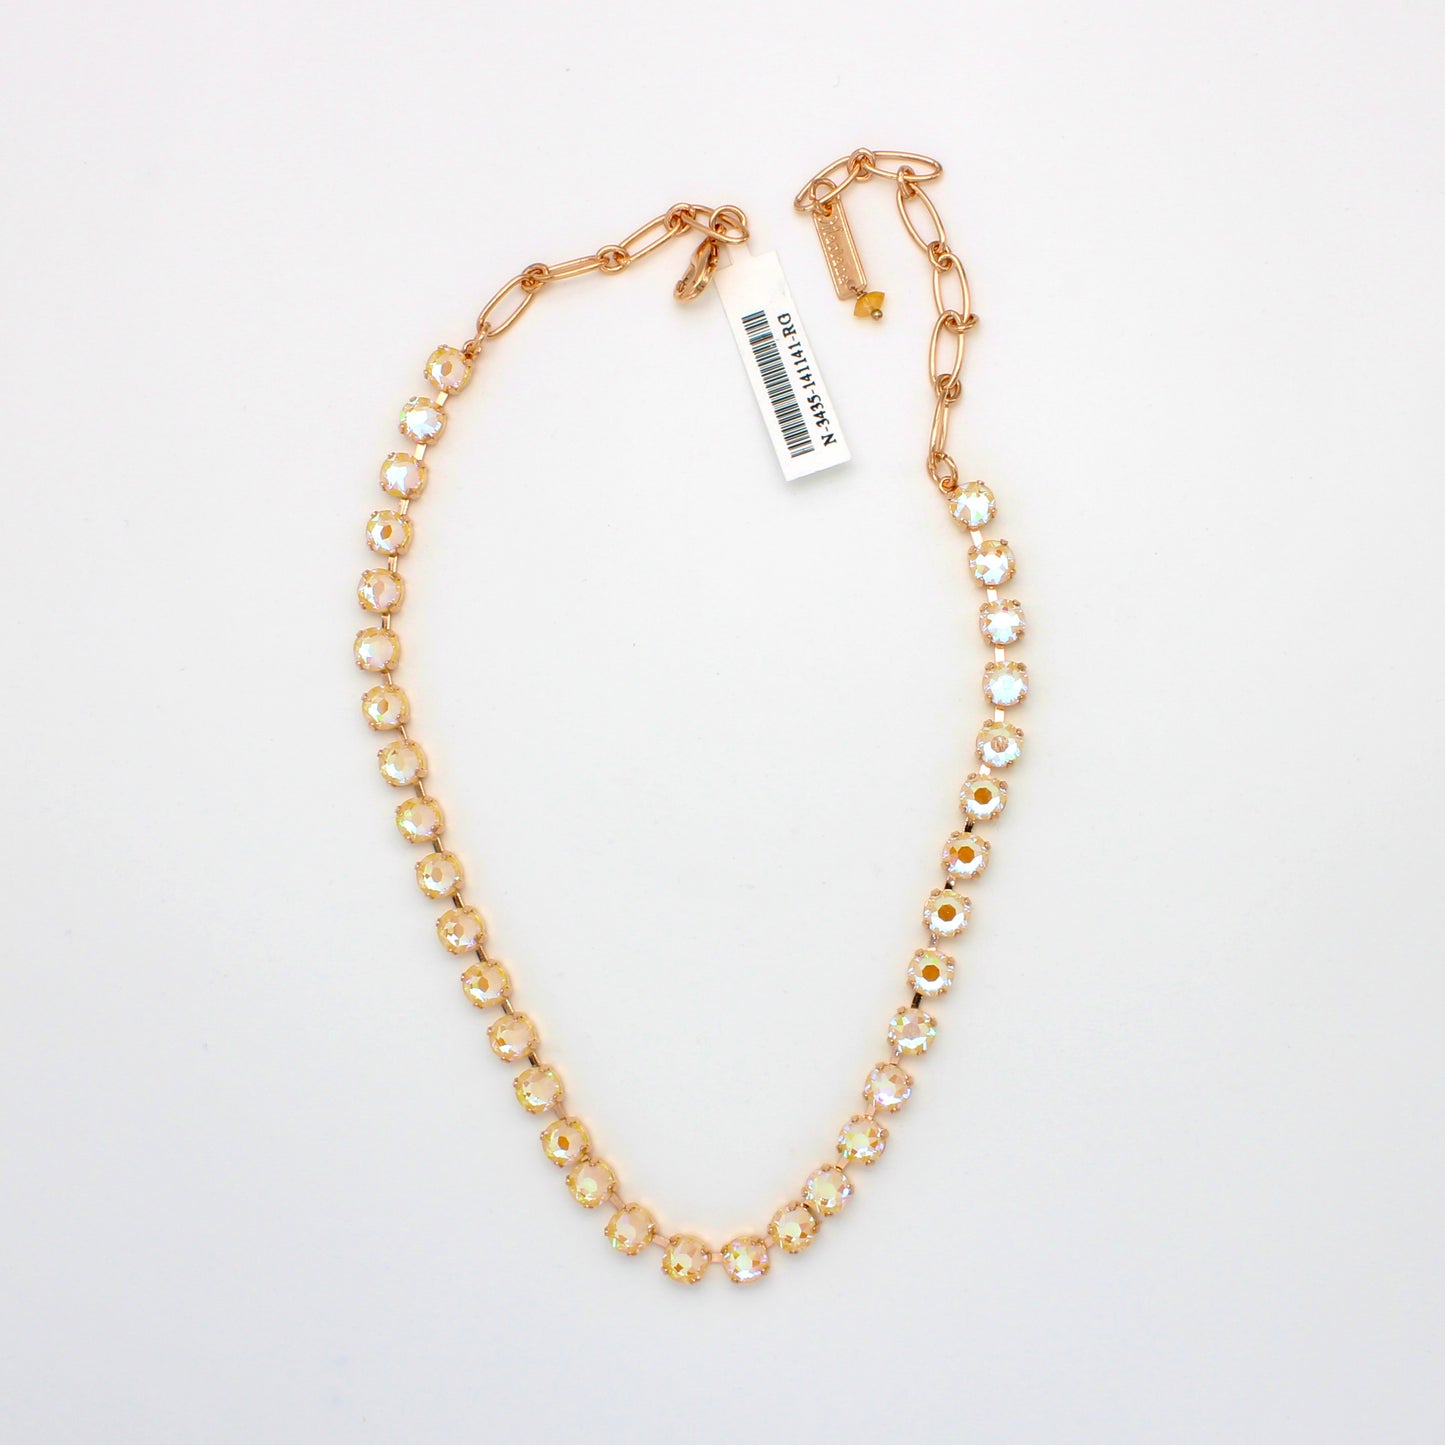 Sunshine Sunkissed 7MM Necklace in Rose Gold - MaryTyke's